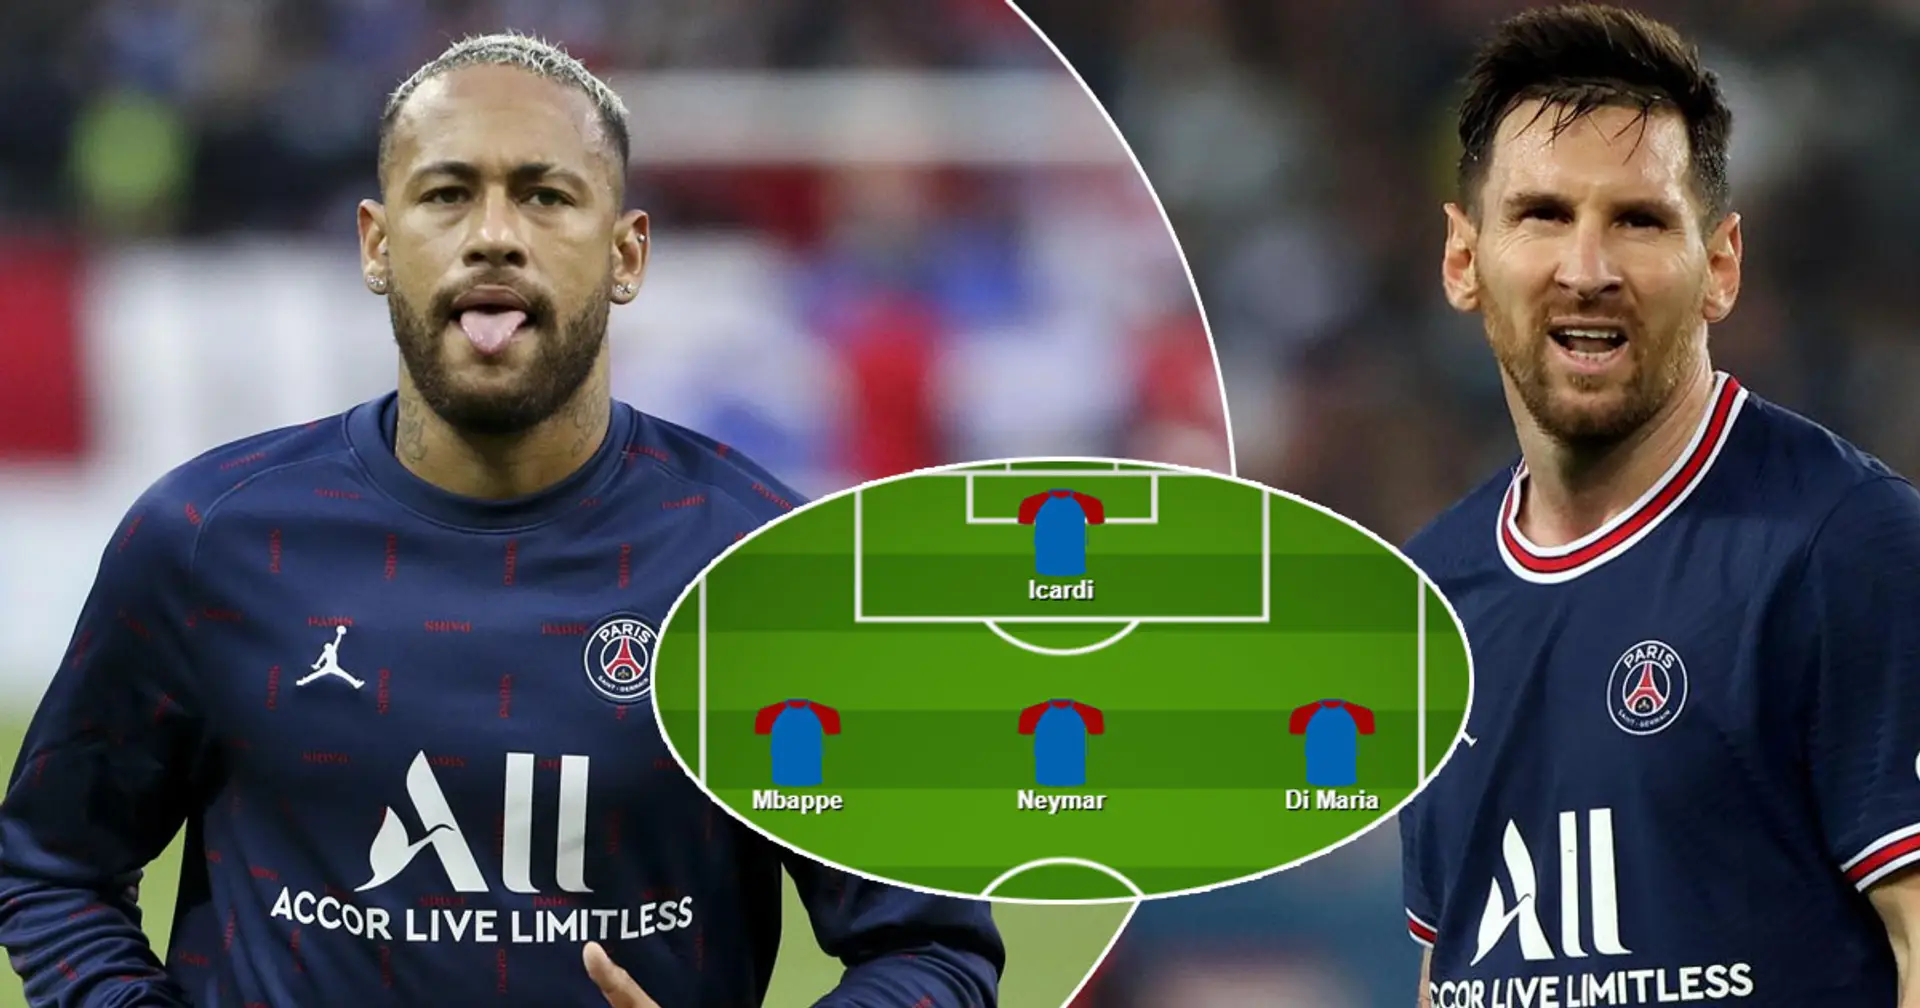 Neymar to take Messi's spot? Select your ultimate XI for Metz clash from 3 options